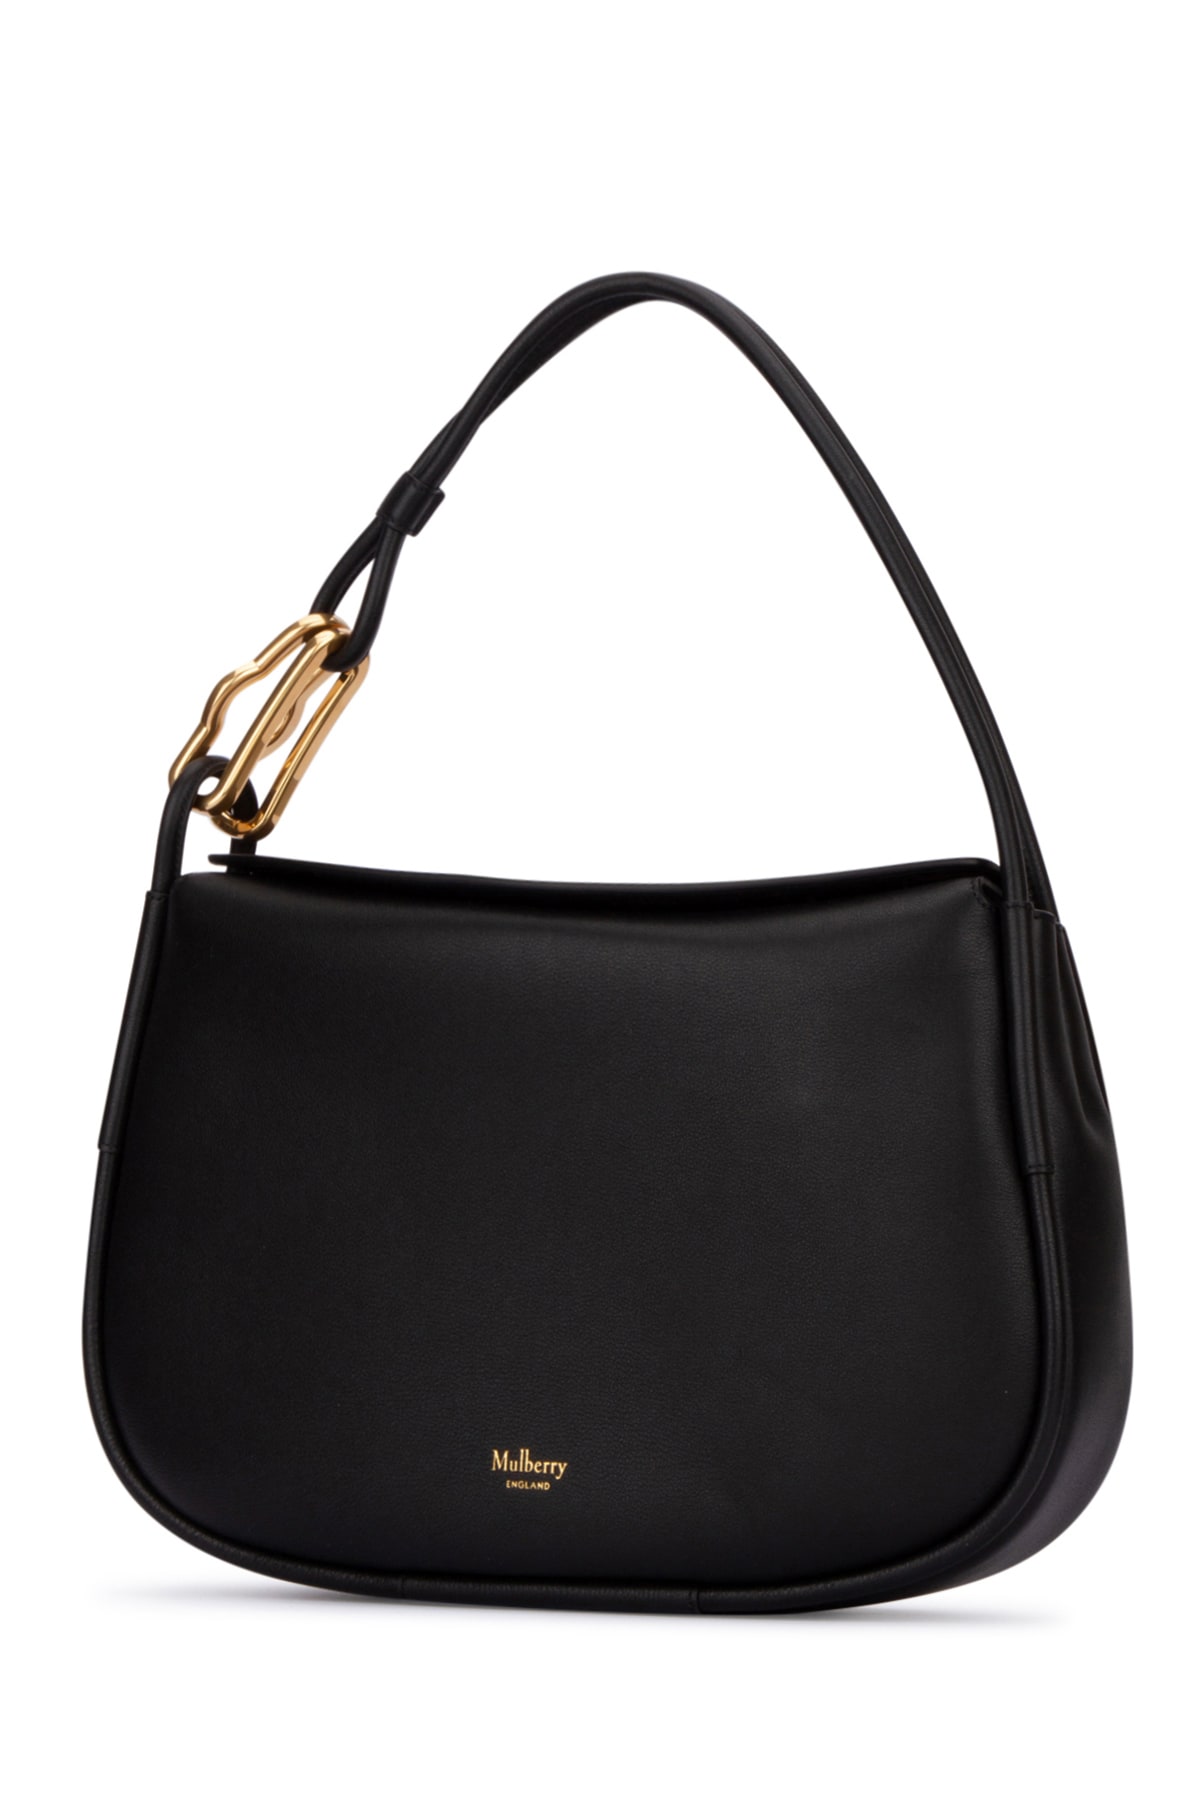 Shop Mulberry Borsa In A100